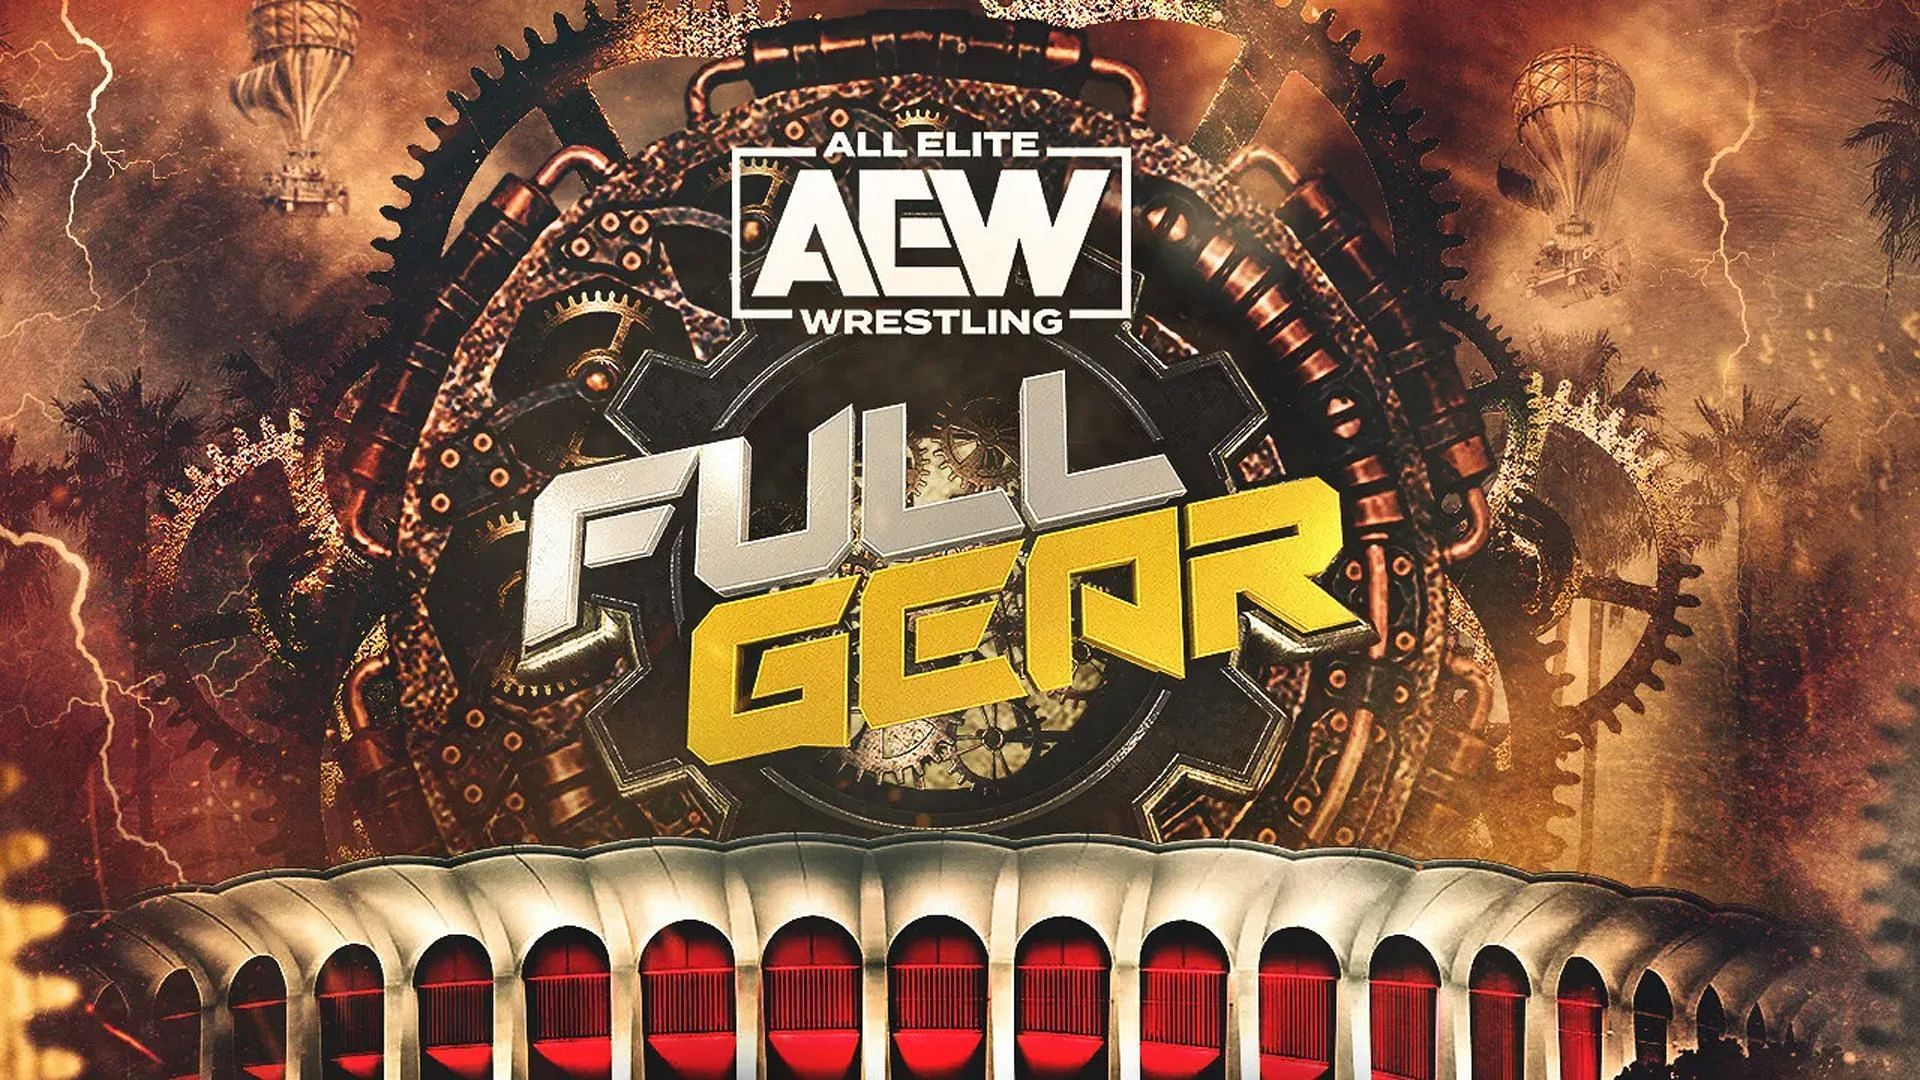 AEW Full Gear 2023 is expected to be a significant event